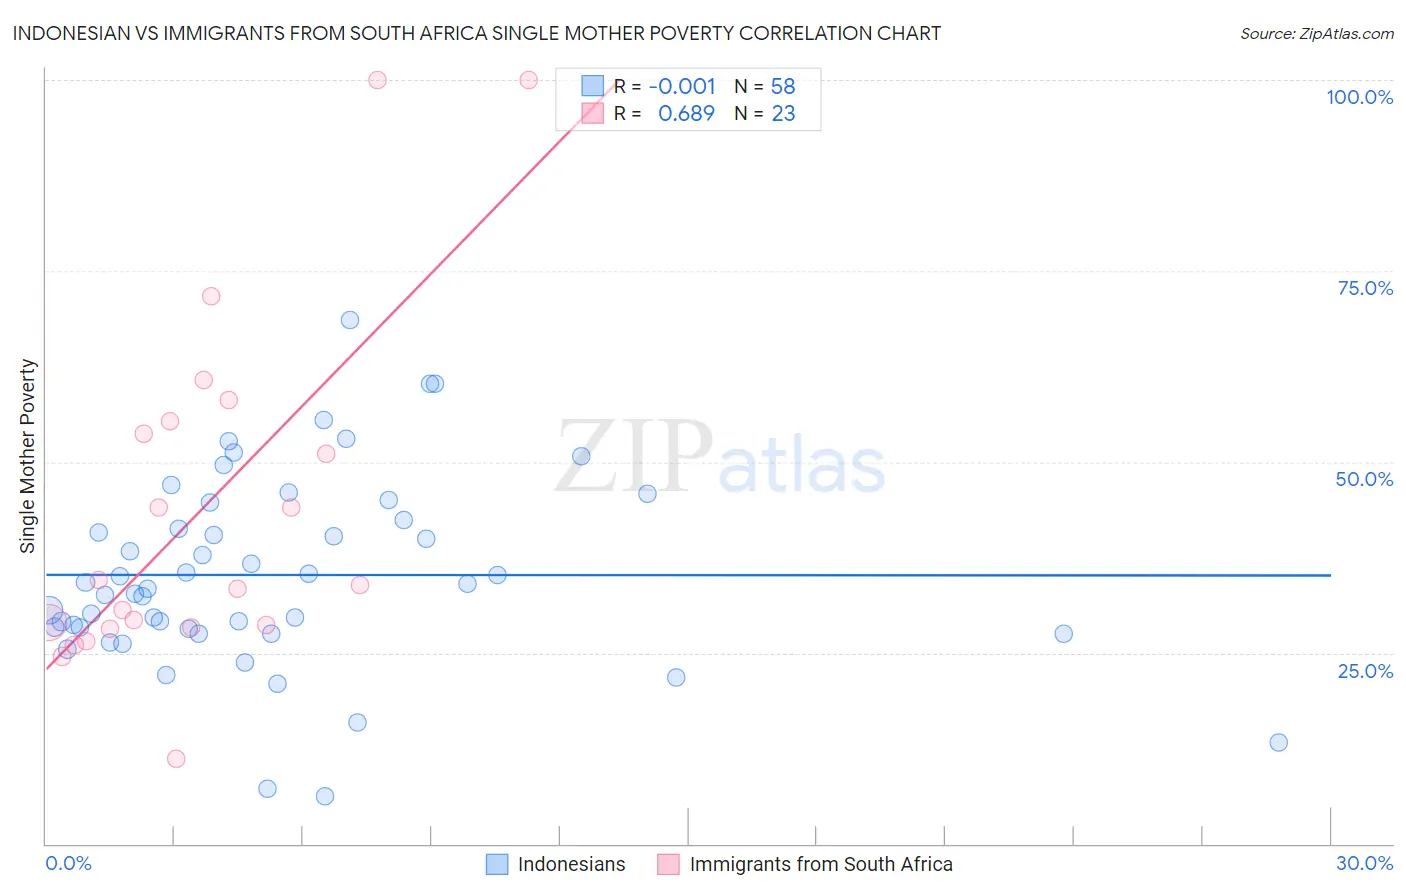 Indonesian vs Immigrants from South Africa Single Mother Poverty